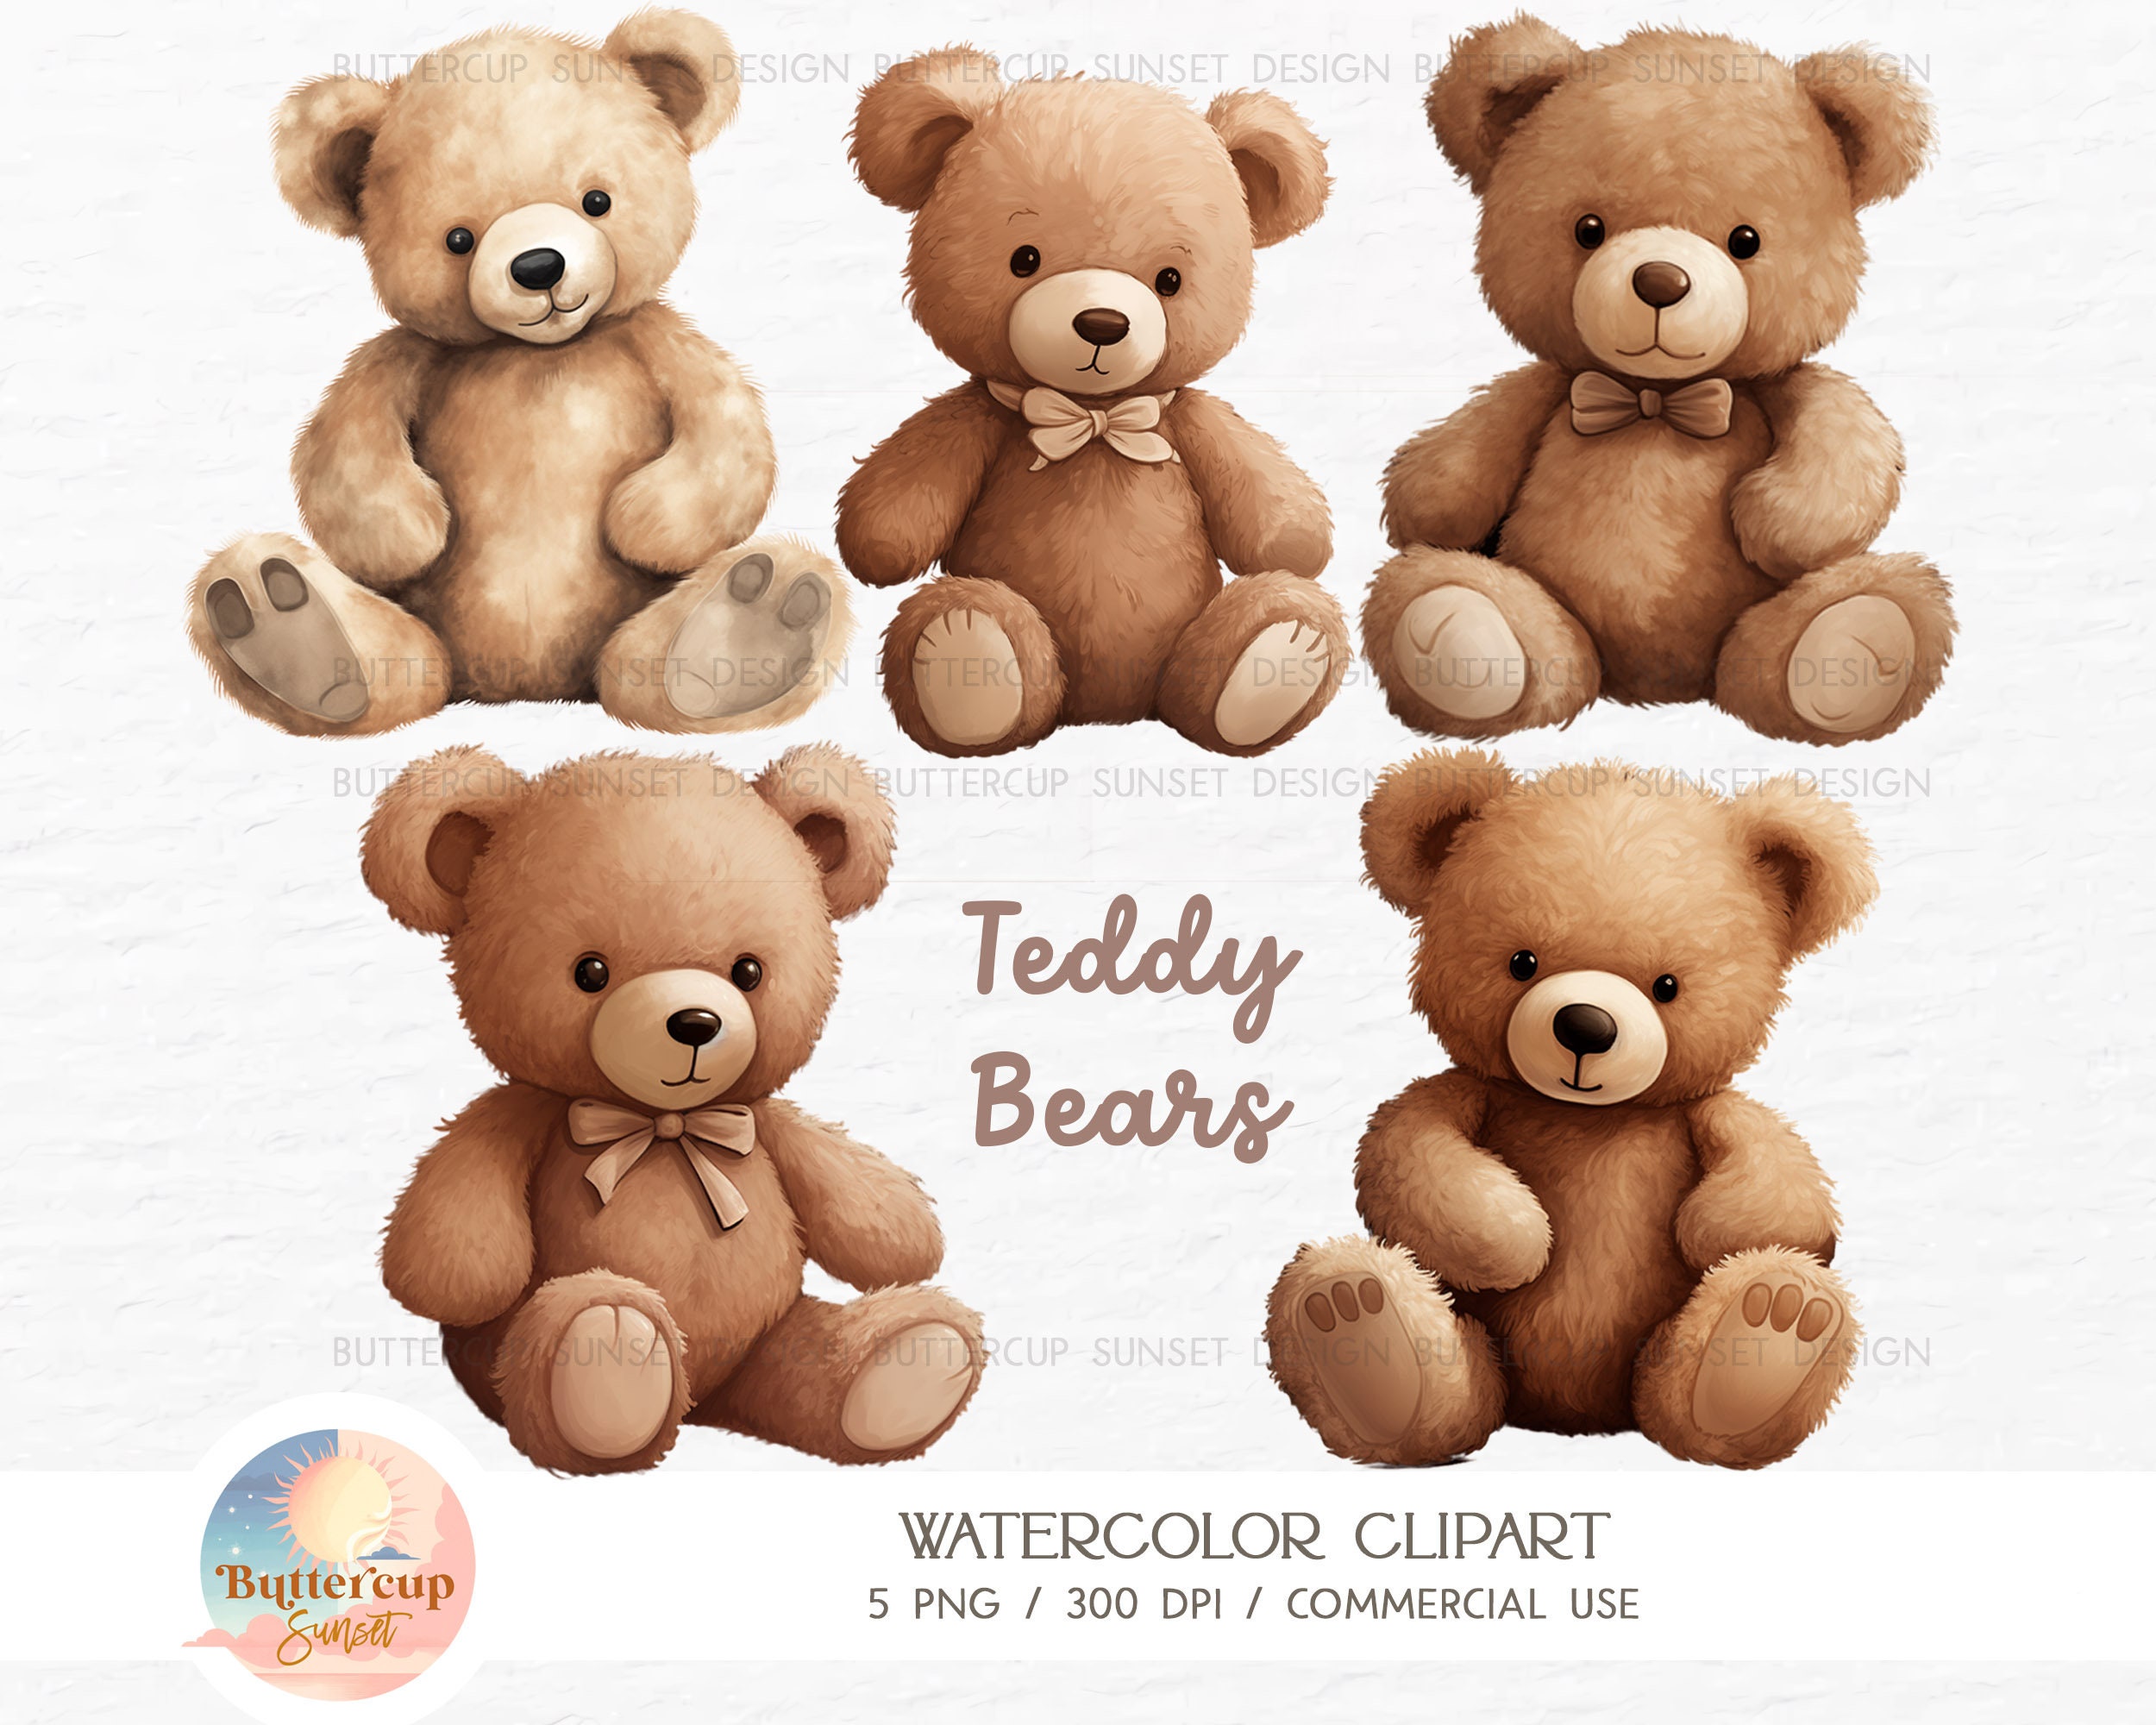 Cute greeting vintage teddy bear illustration Art Board Print for Sale by  knappidesign